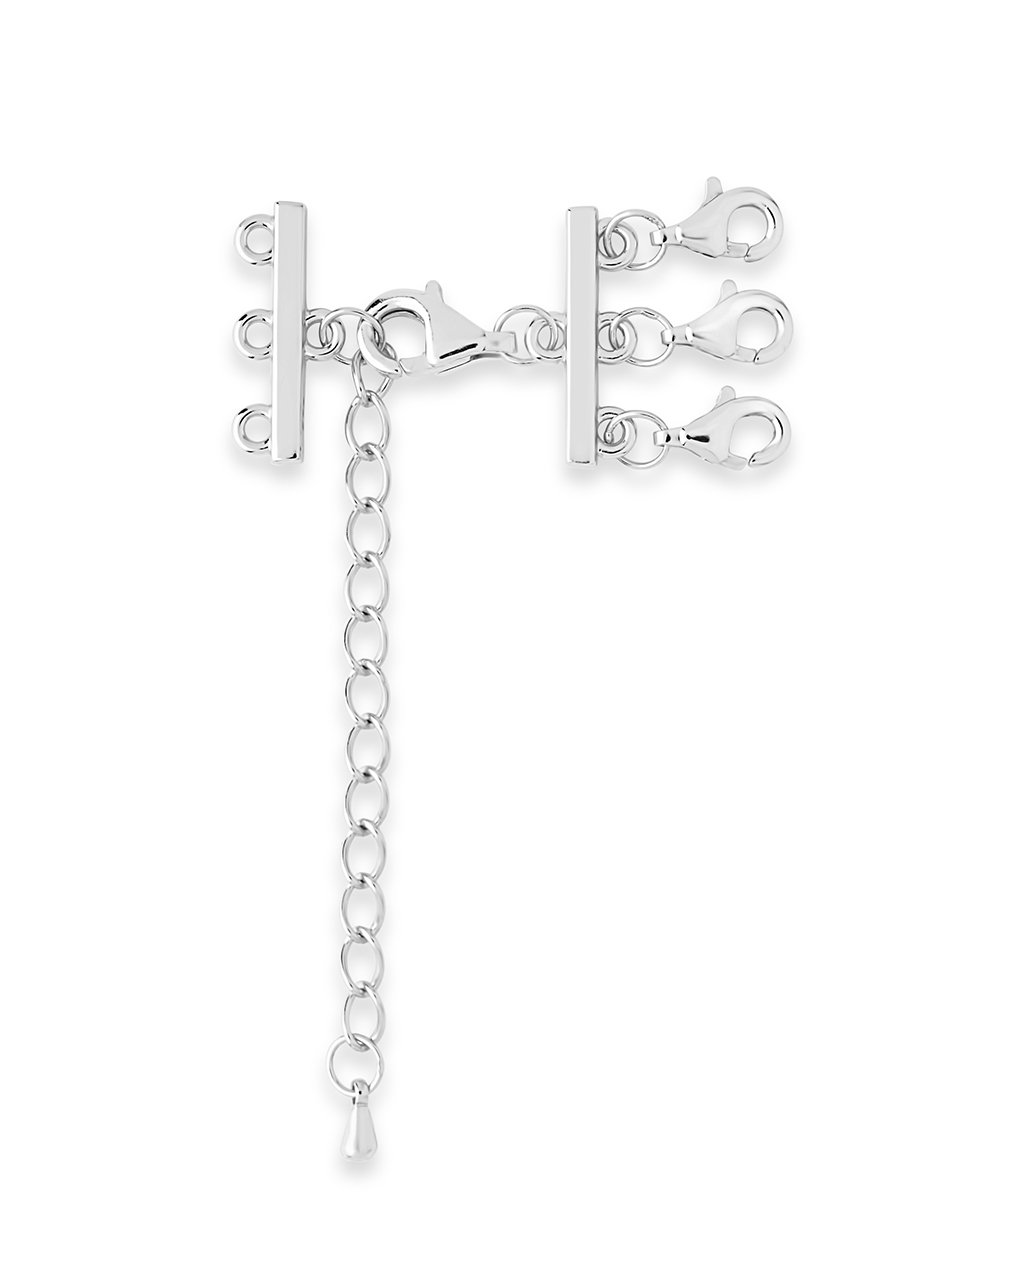 Layer It! Necklace Clasp in Sterling Silver